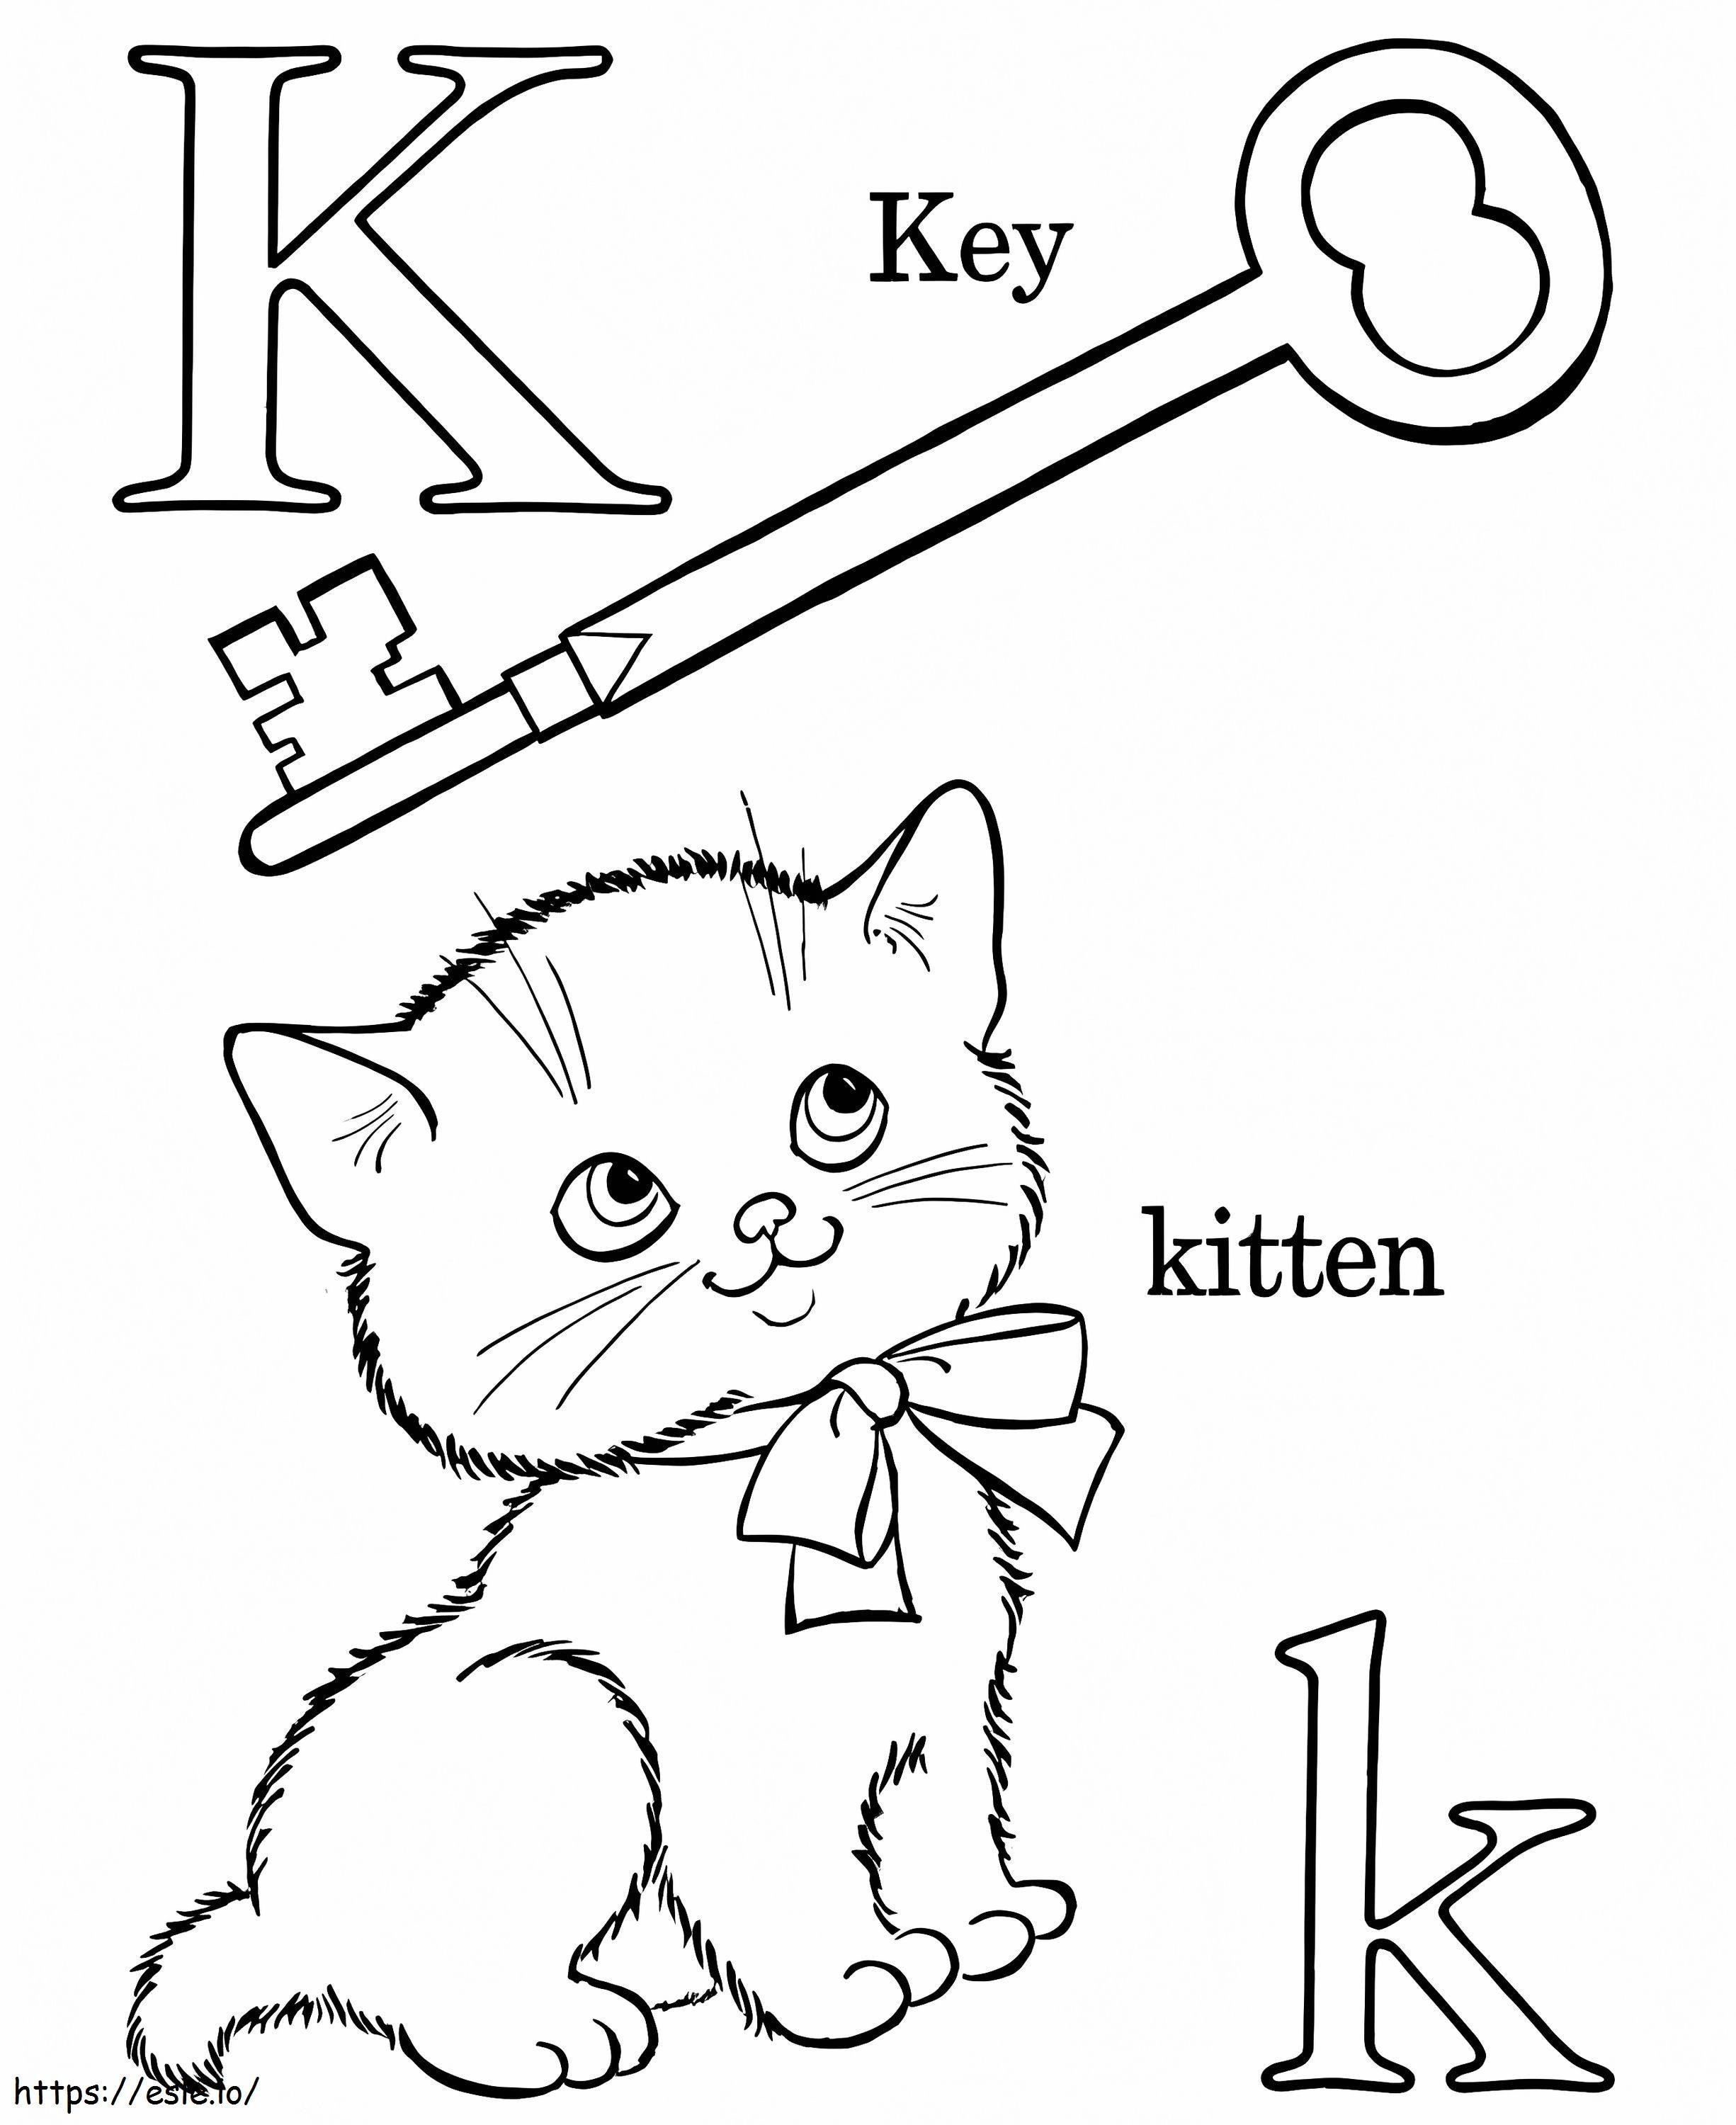 Alphabet K And Kitten Key coloring page